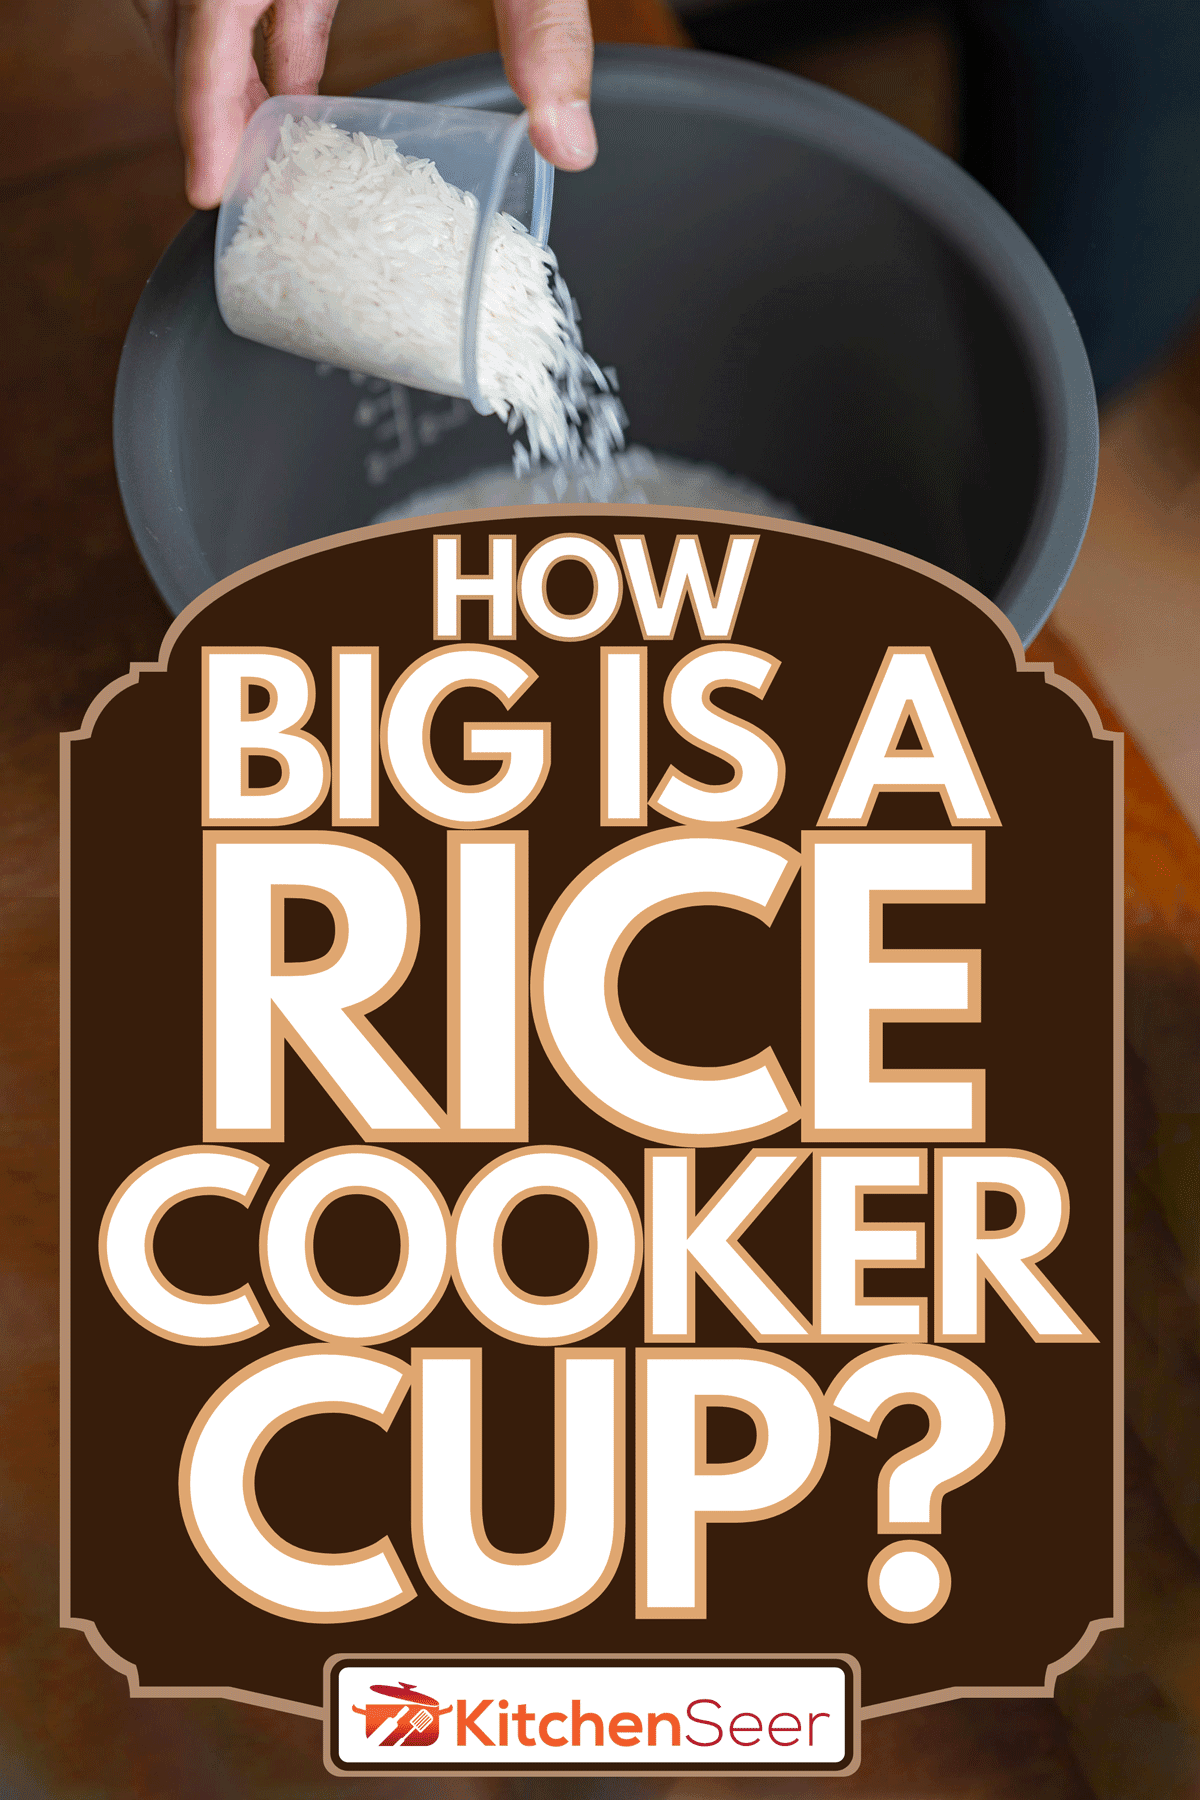 Cook measured the rice with a measuring cup to cook the rice. How Big Is A Rice Cooker Cup?